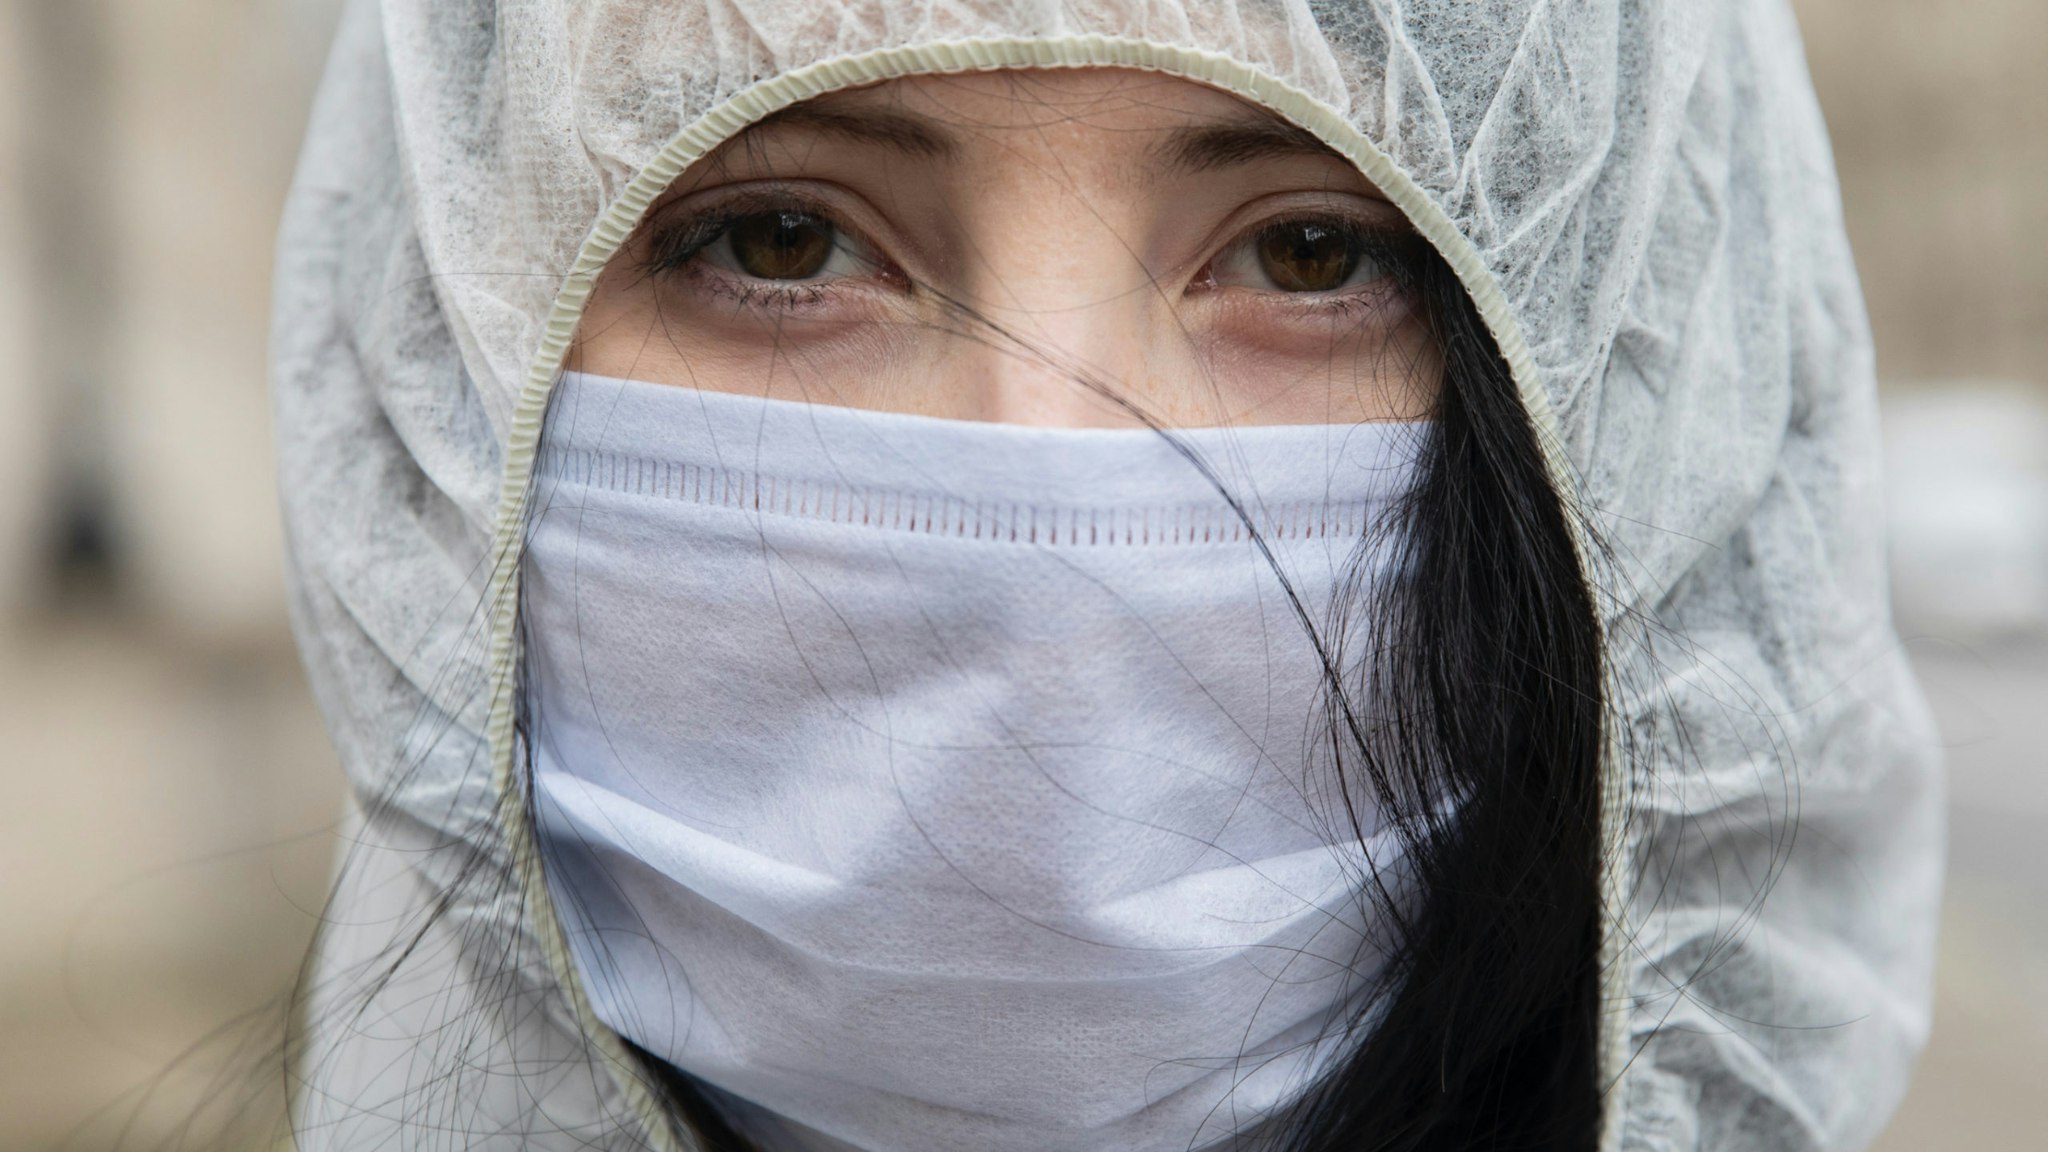 A protester wears a face mask outside Downing Street after the weekly cabinet meeting on March 17, 2020 in London, England.